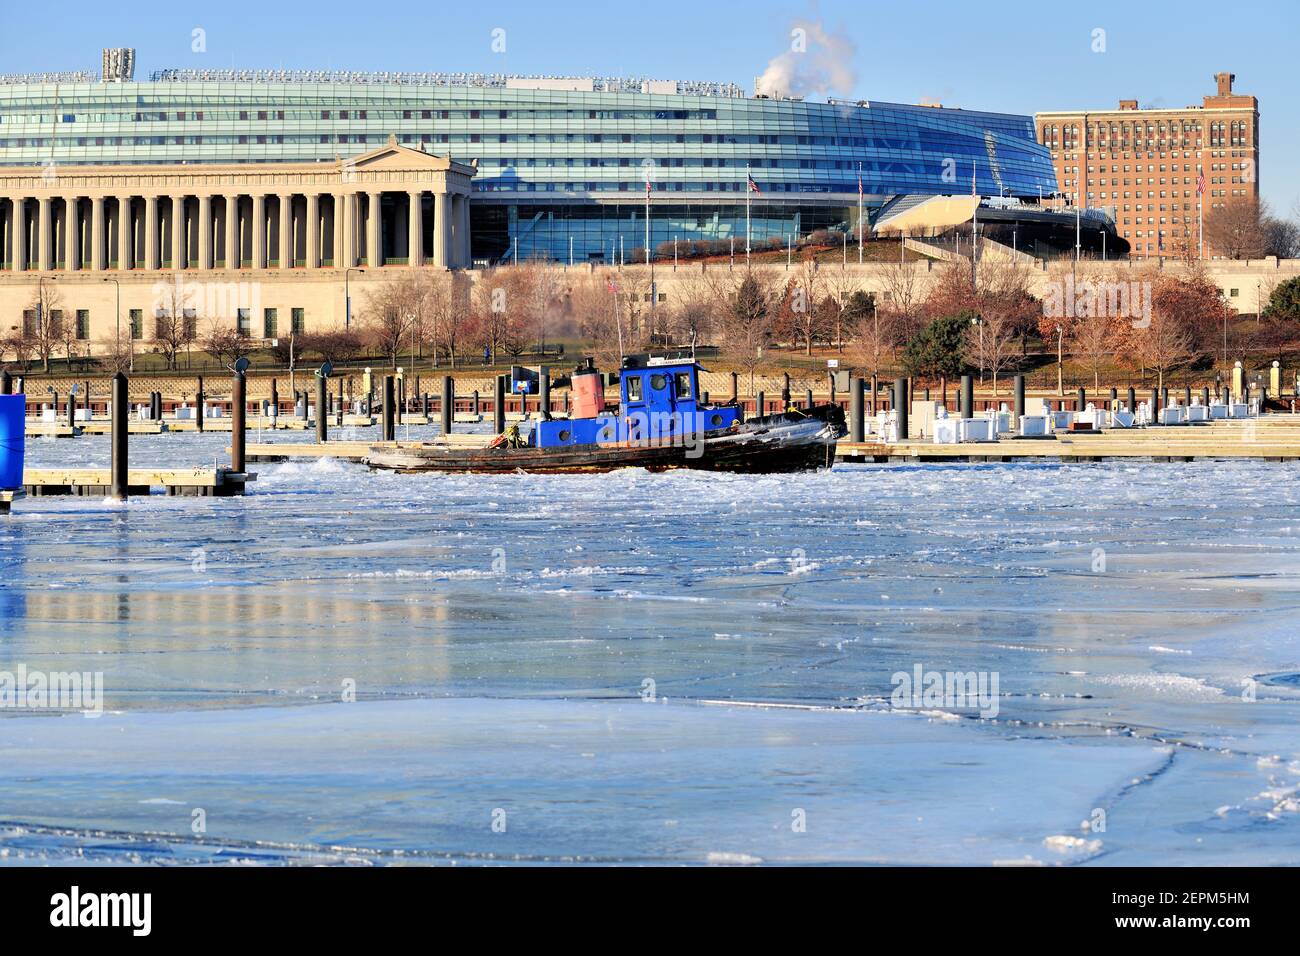 Chicago, Illinois, USA. An ice breaking ship plows through a frozen Burnham Harbor in Chicago attempting to open channels to flowing water. Stock Photo